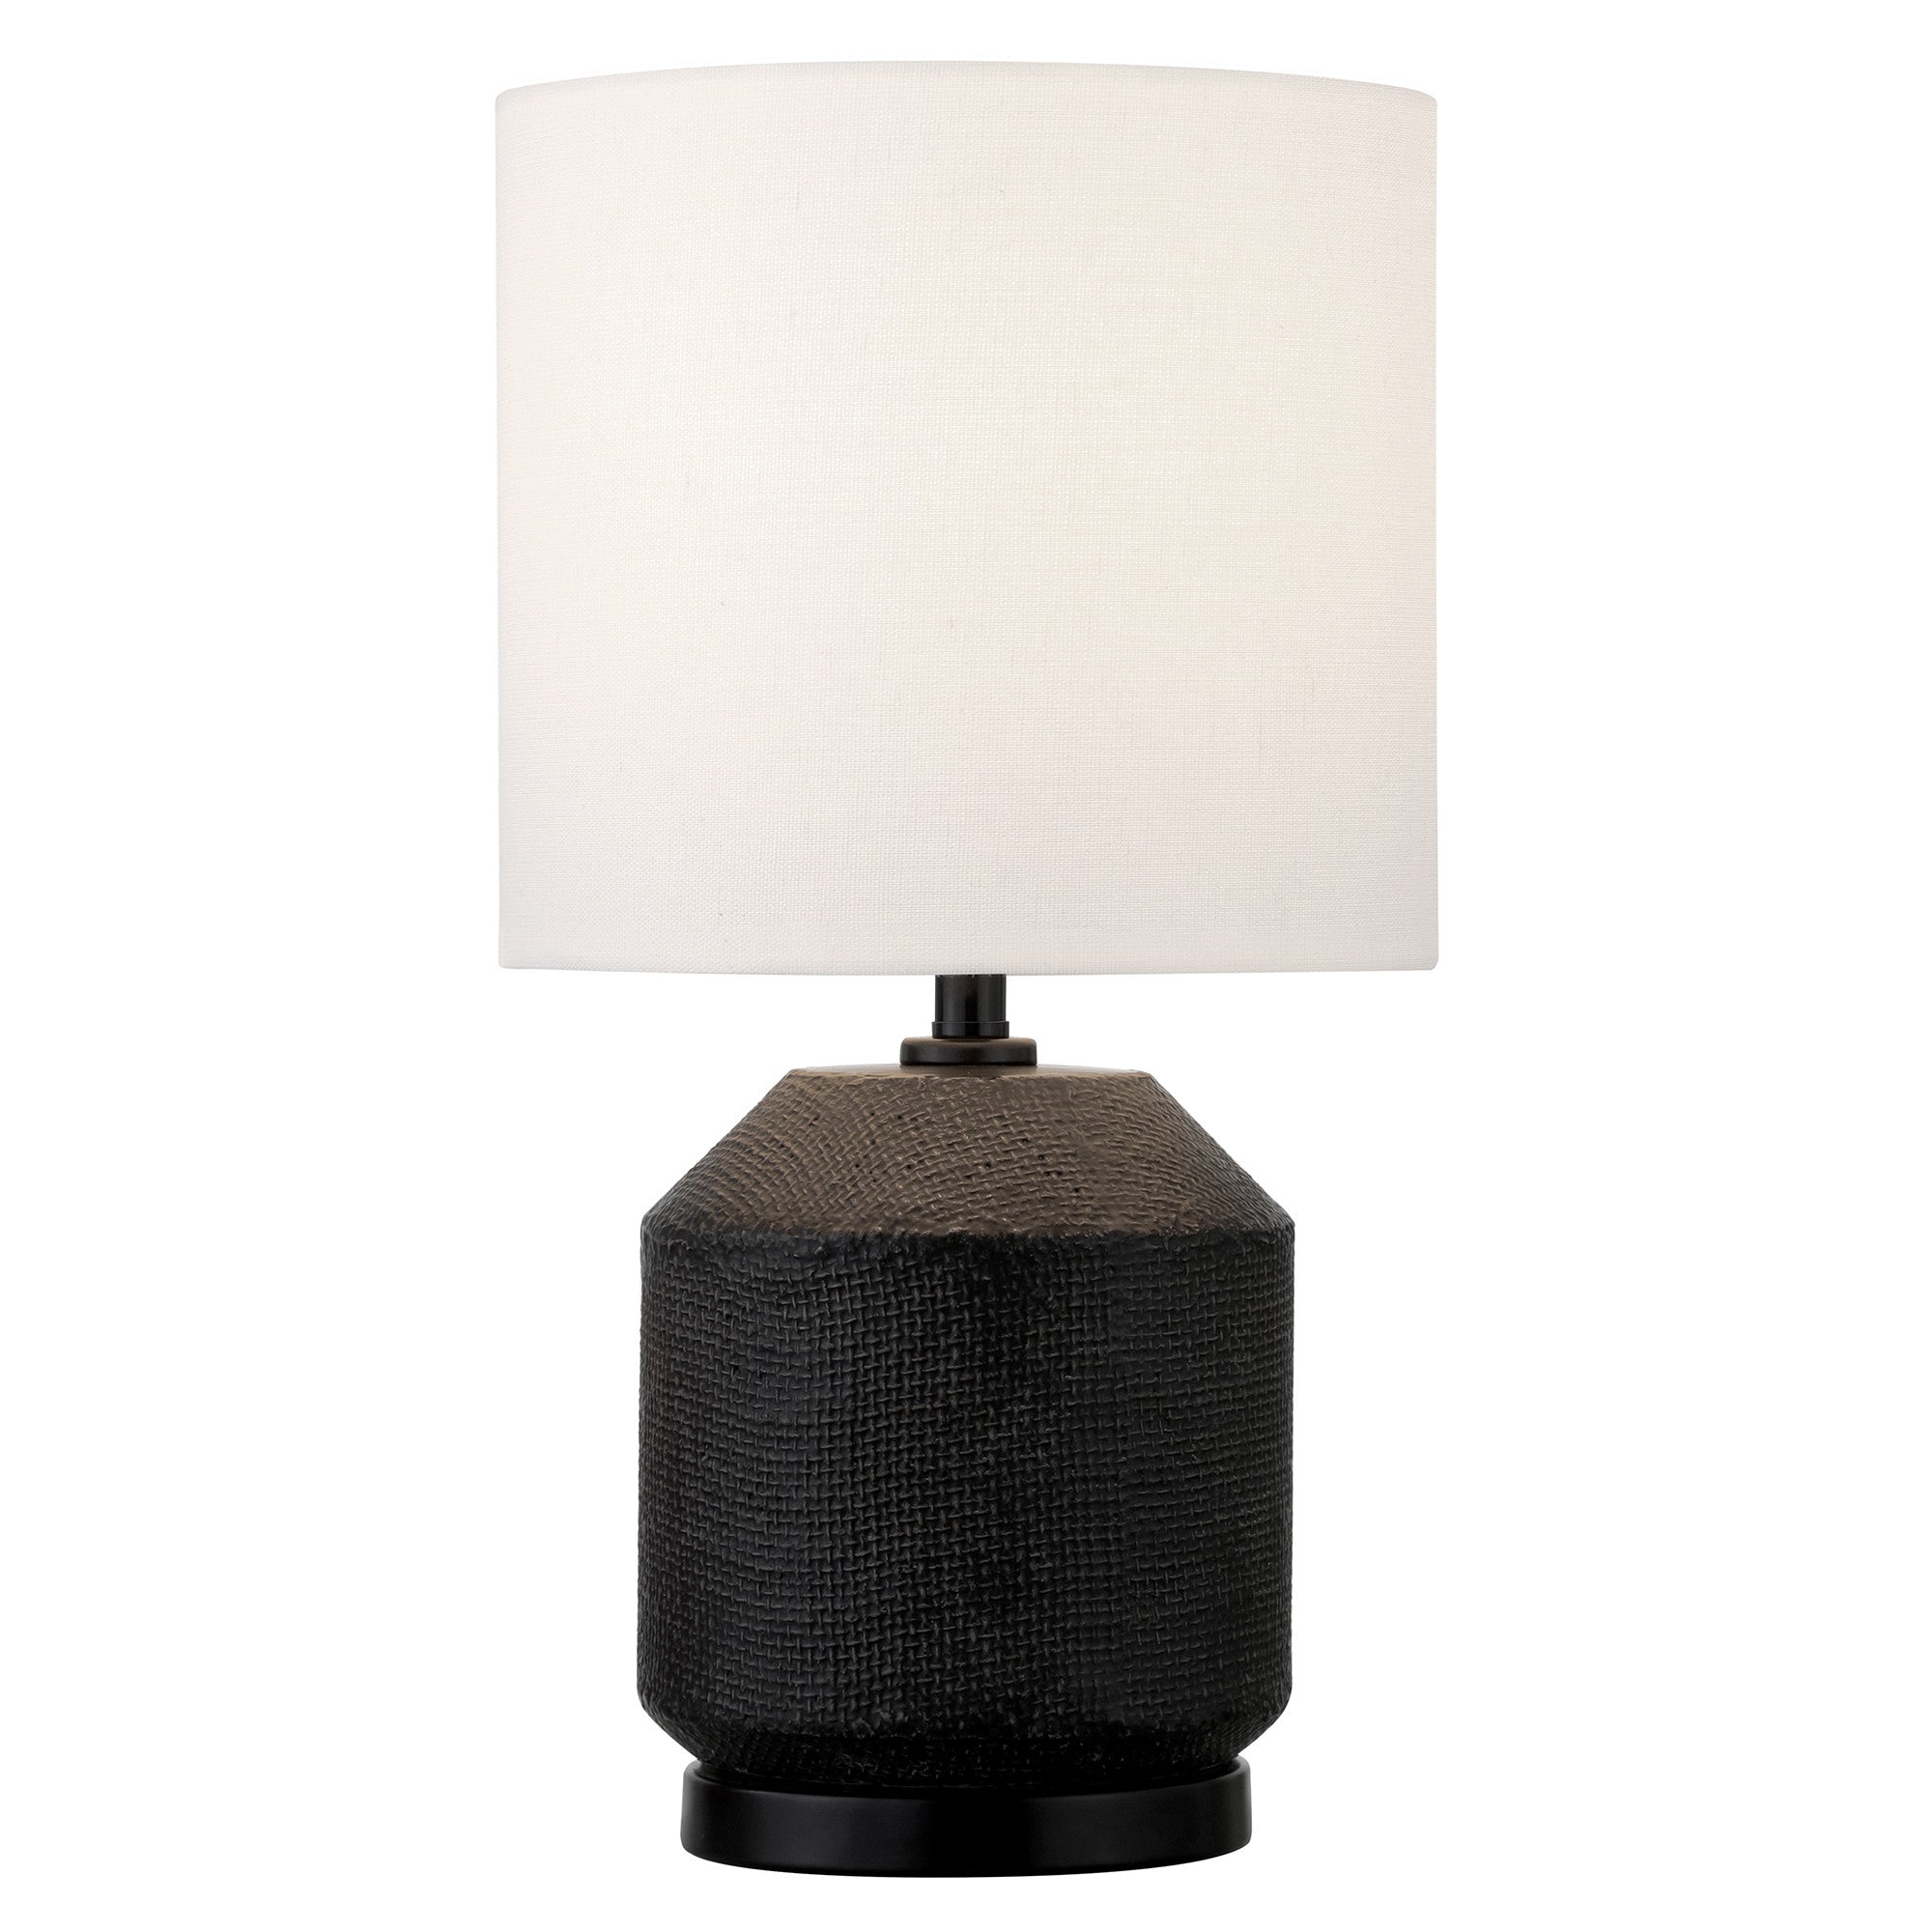 15" Black Ceramic Cylinder Table Lamp With White Drum Shade